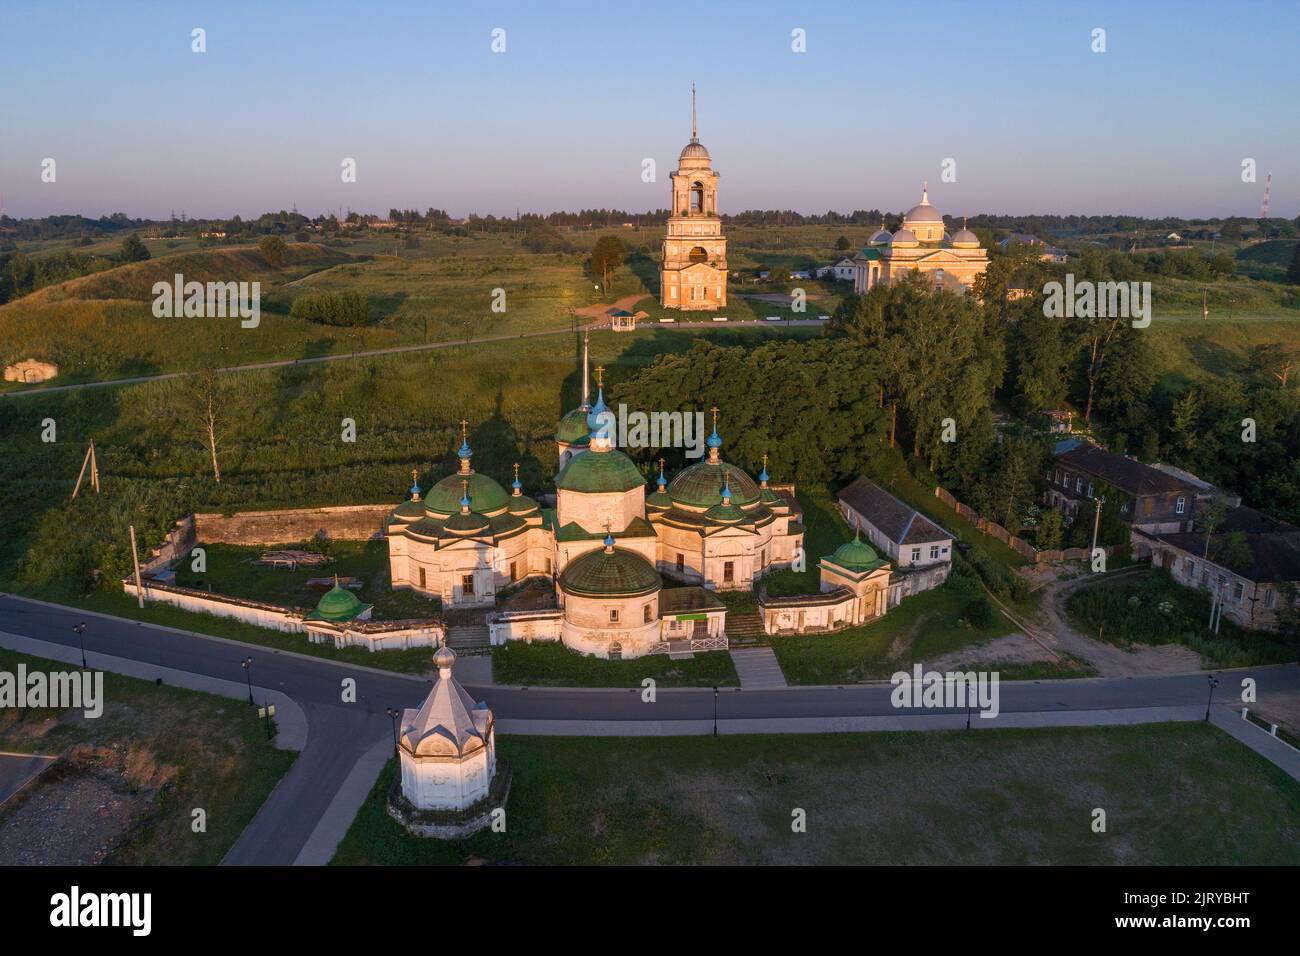 Ancient orthodox temples of Staritsa town in July morning landscape. Shooting from a quadcopter. Tver region, Russia Stock Photo